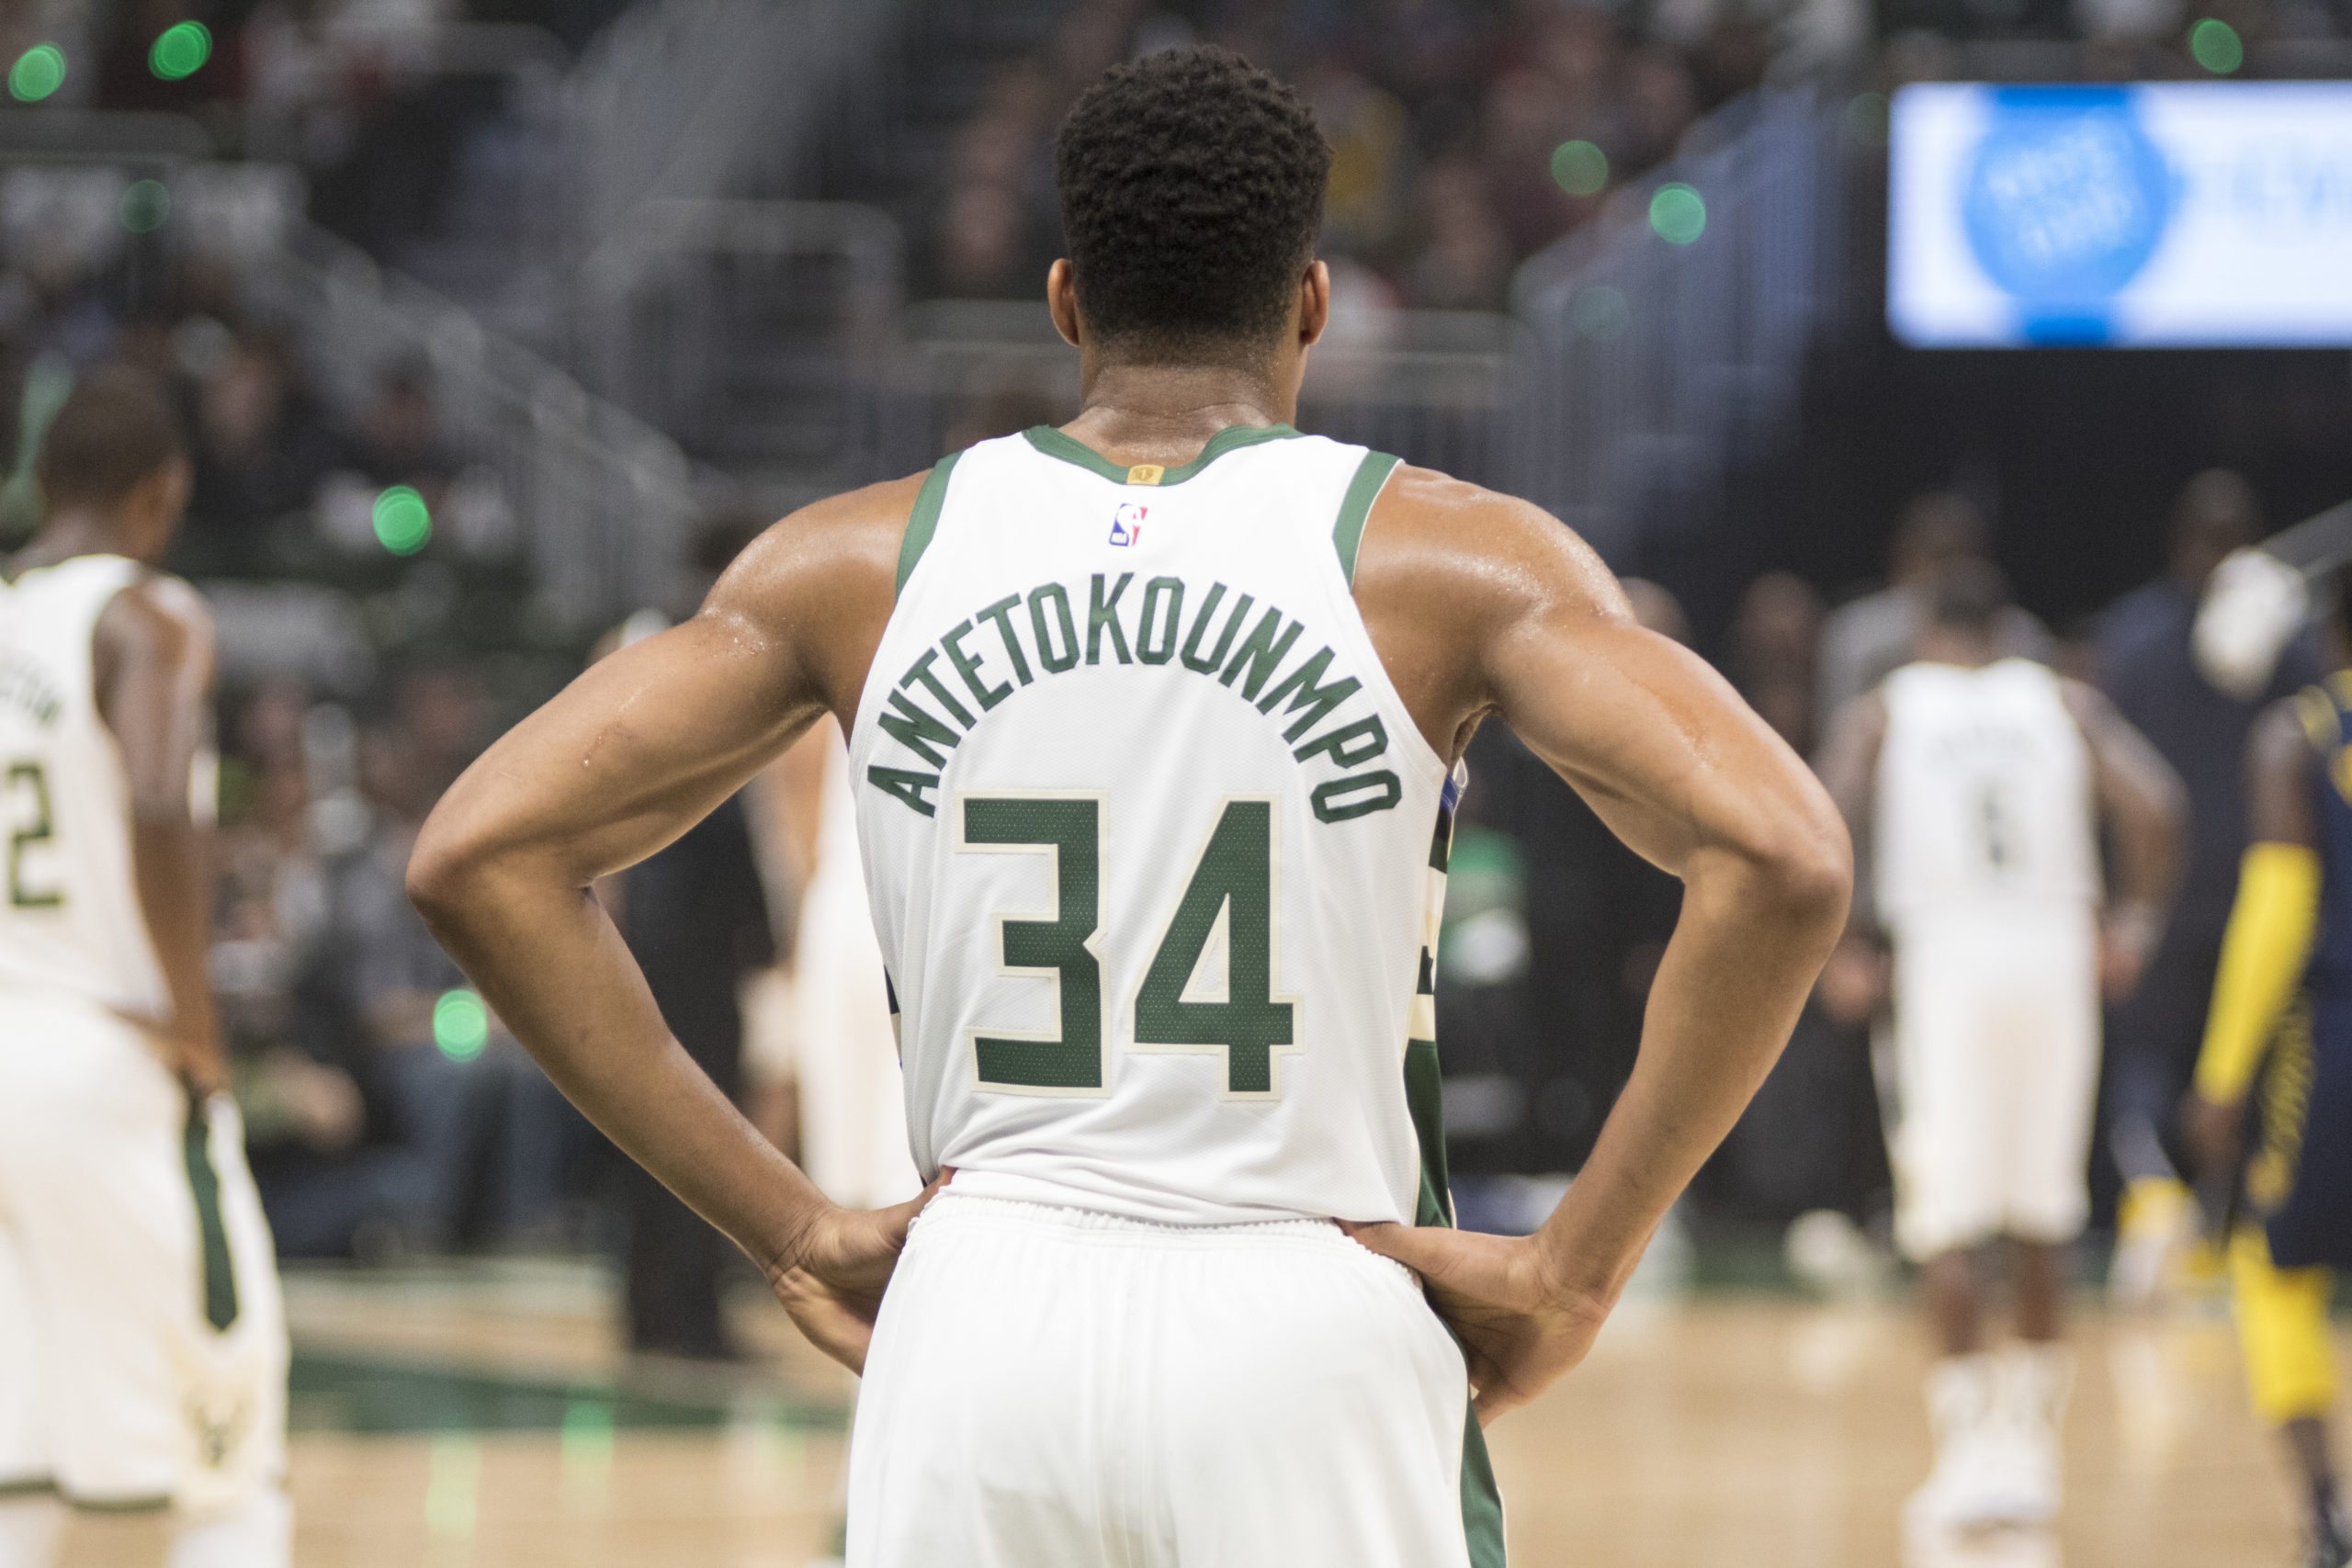 Giannis Antetokounmpo: From poverty in Greece to NBA's most lucrative player